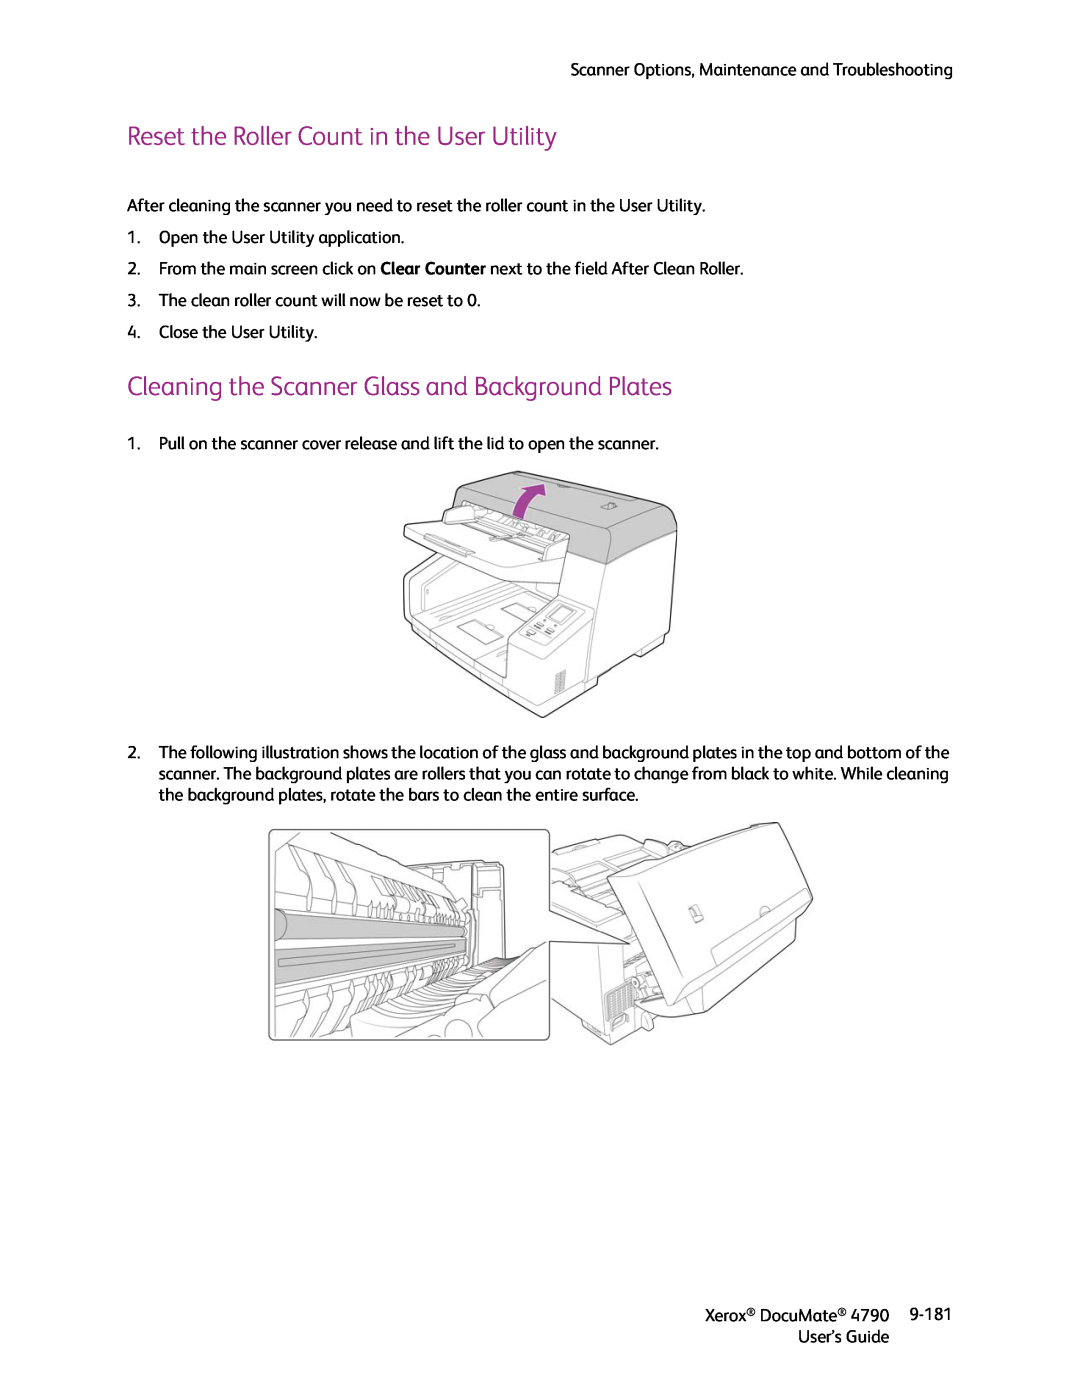 Xerox xerox documate manual Reset the Roller Count in the User Utility, Cleaning the Scanner Glass and Background Plates 